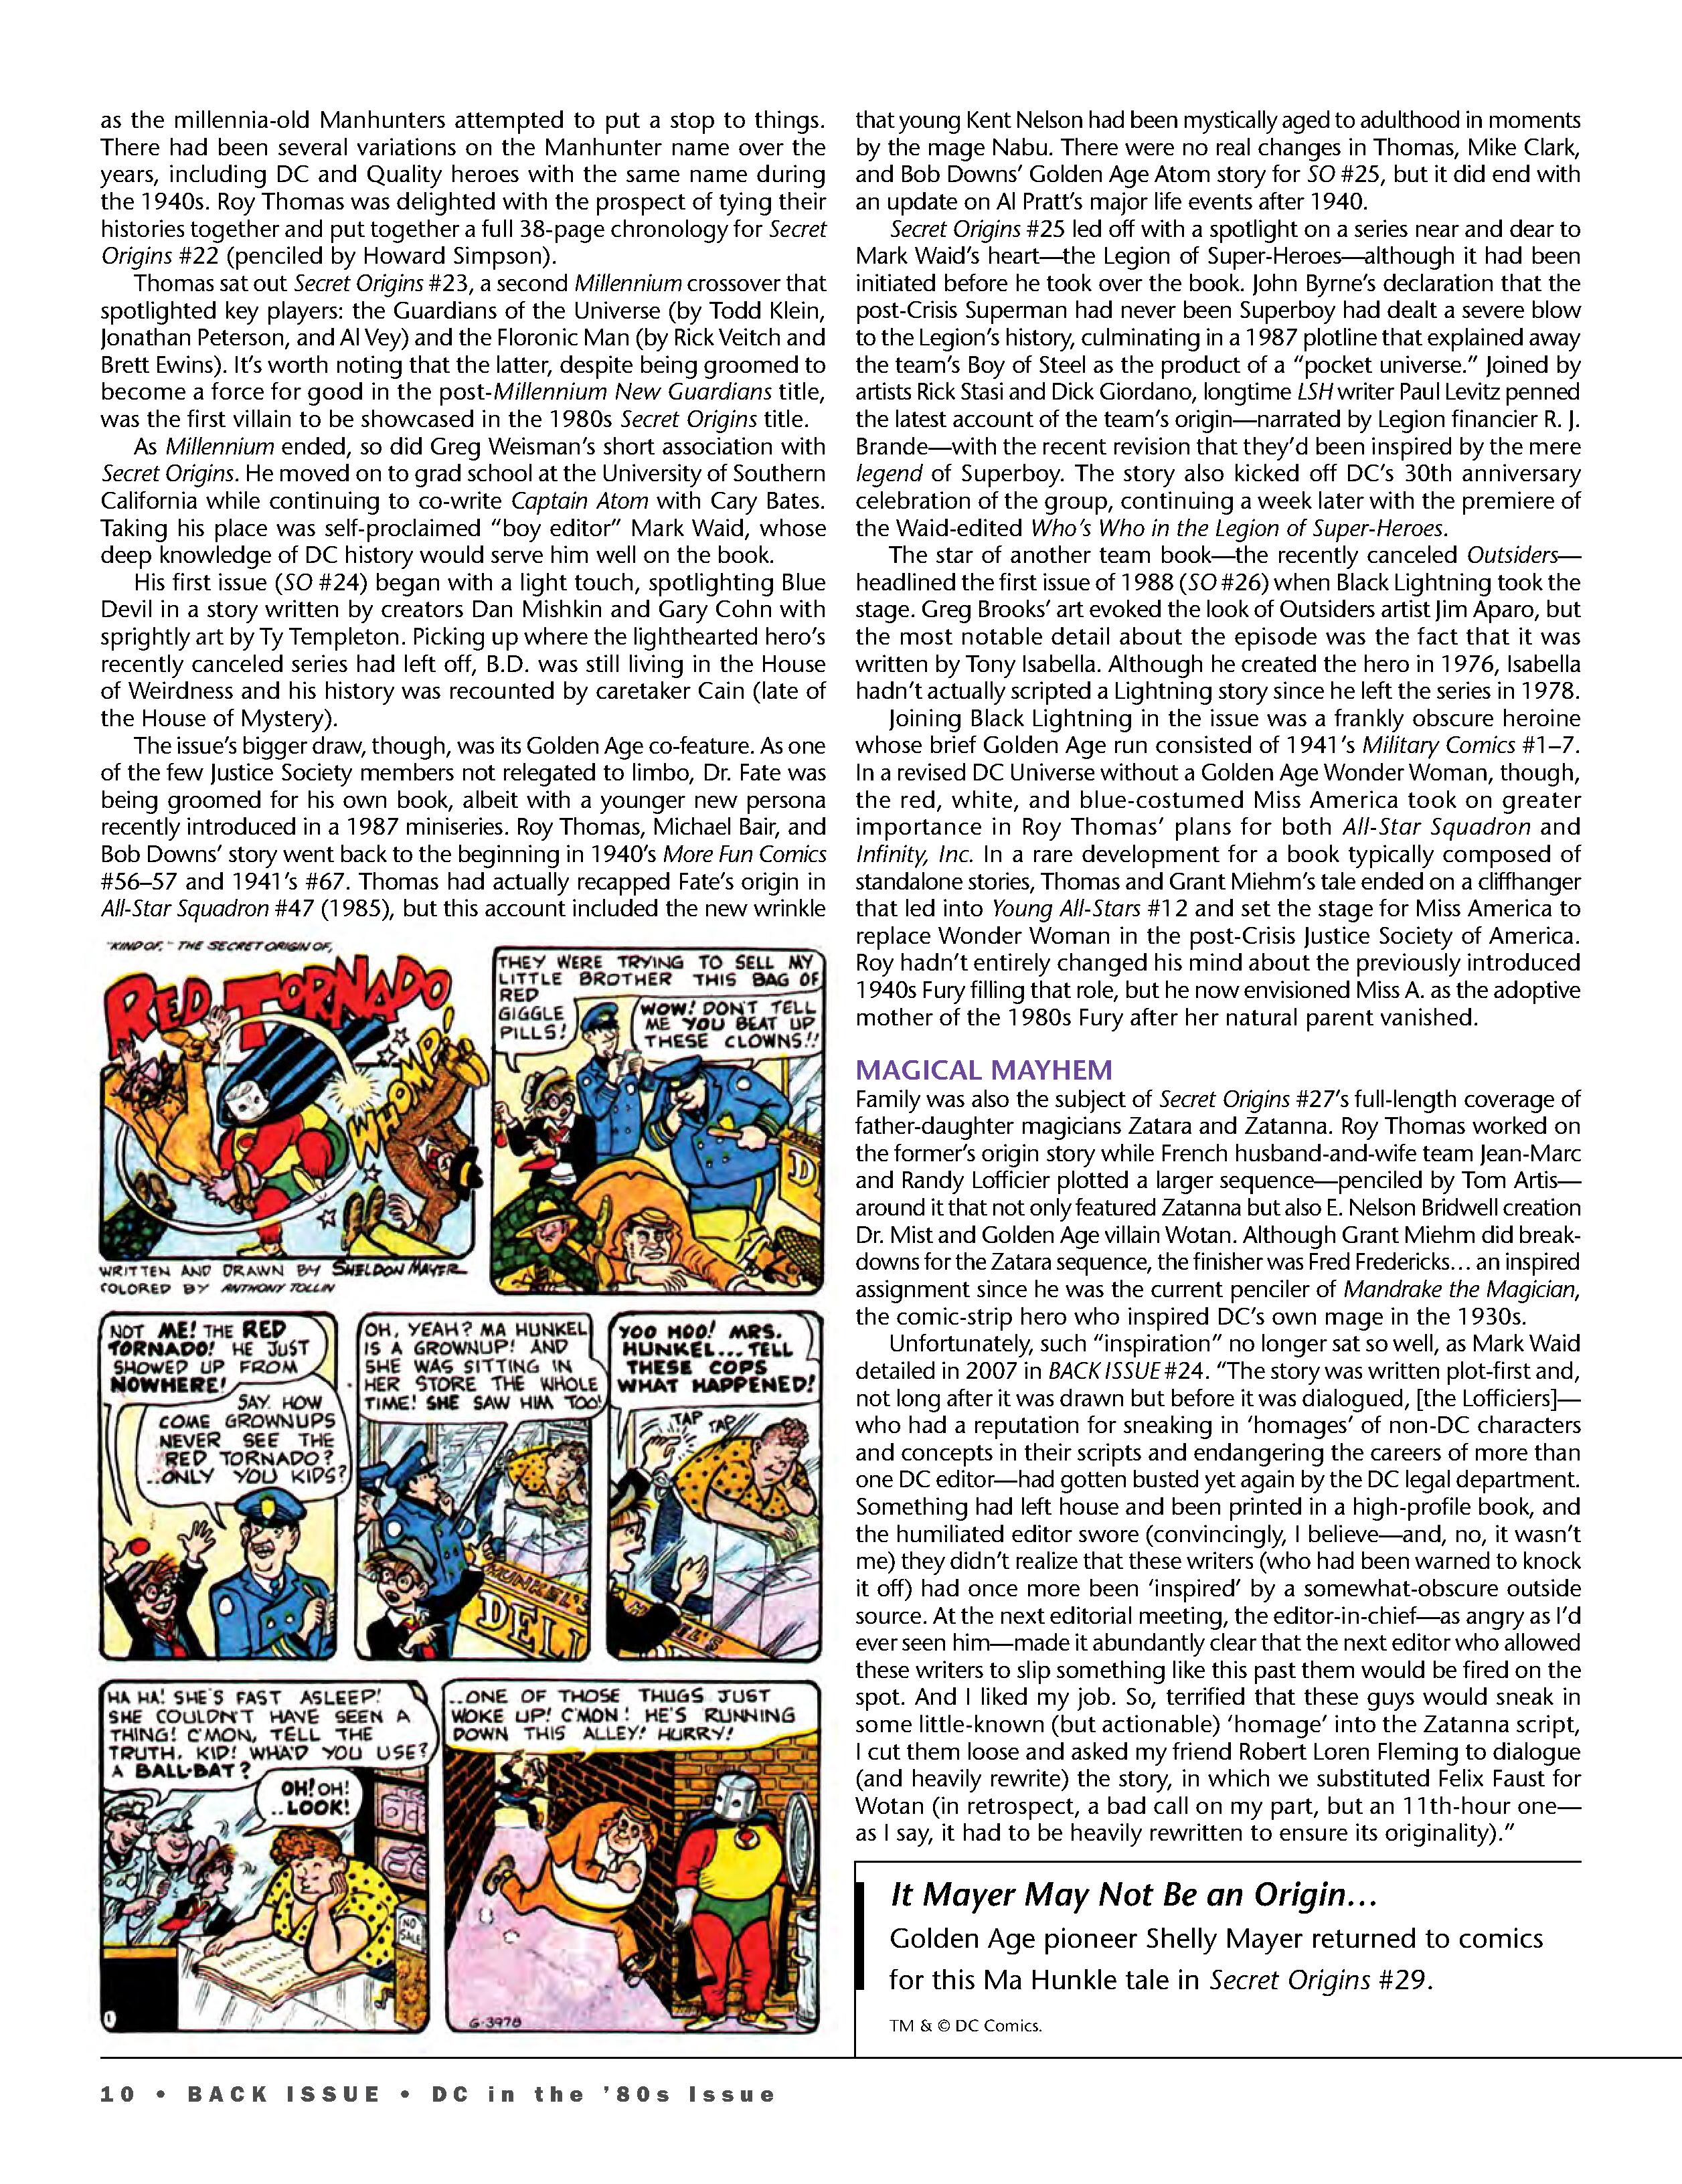 Read online Back Issue comic -  Issue #98 - 12